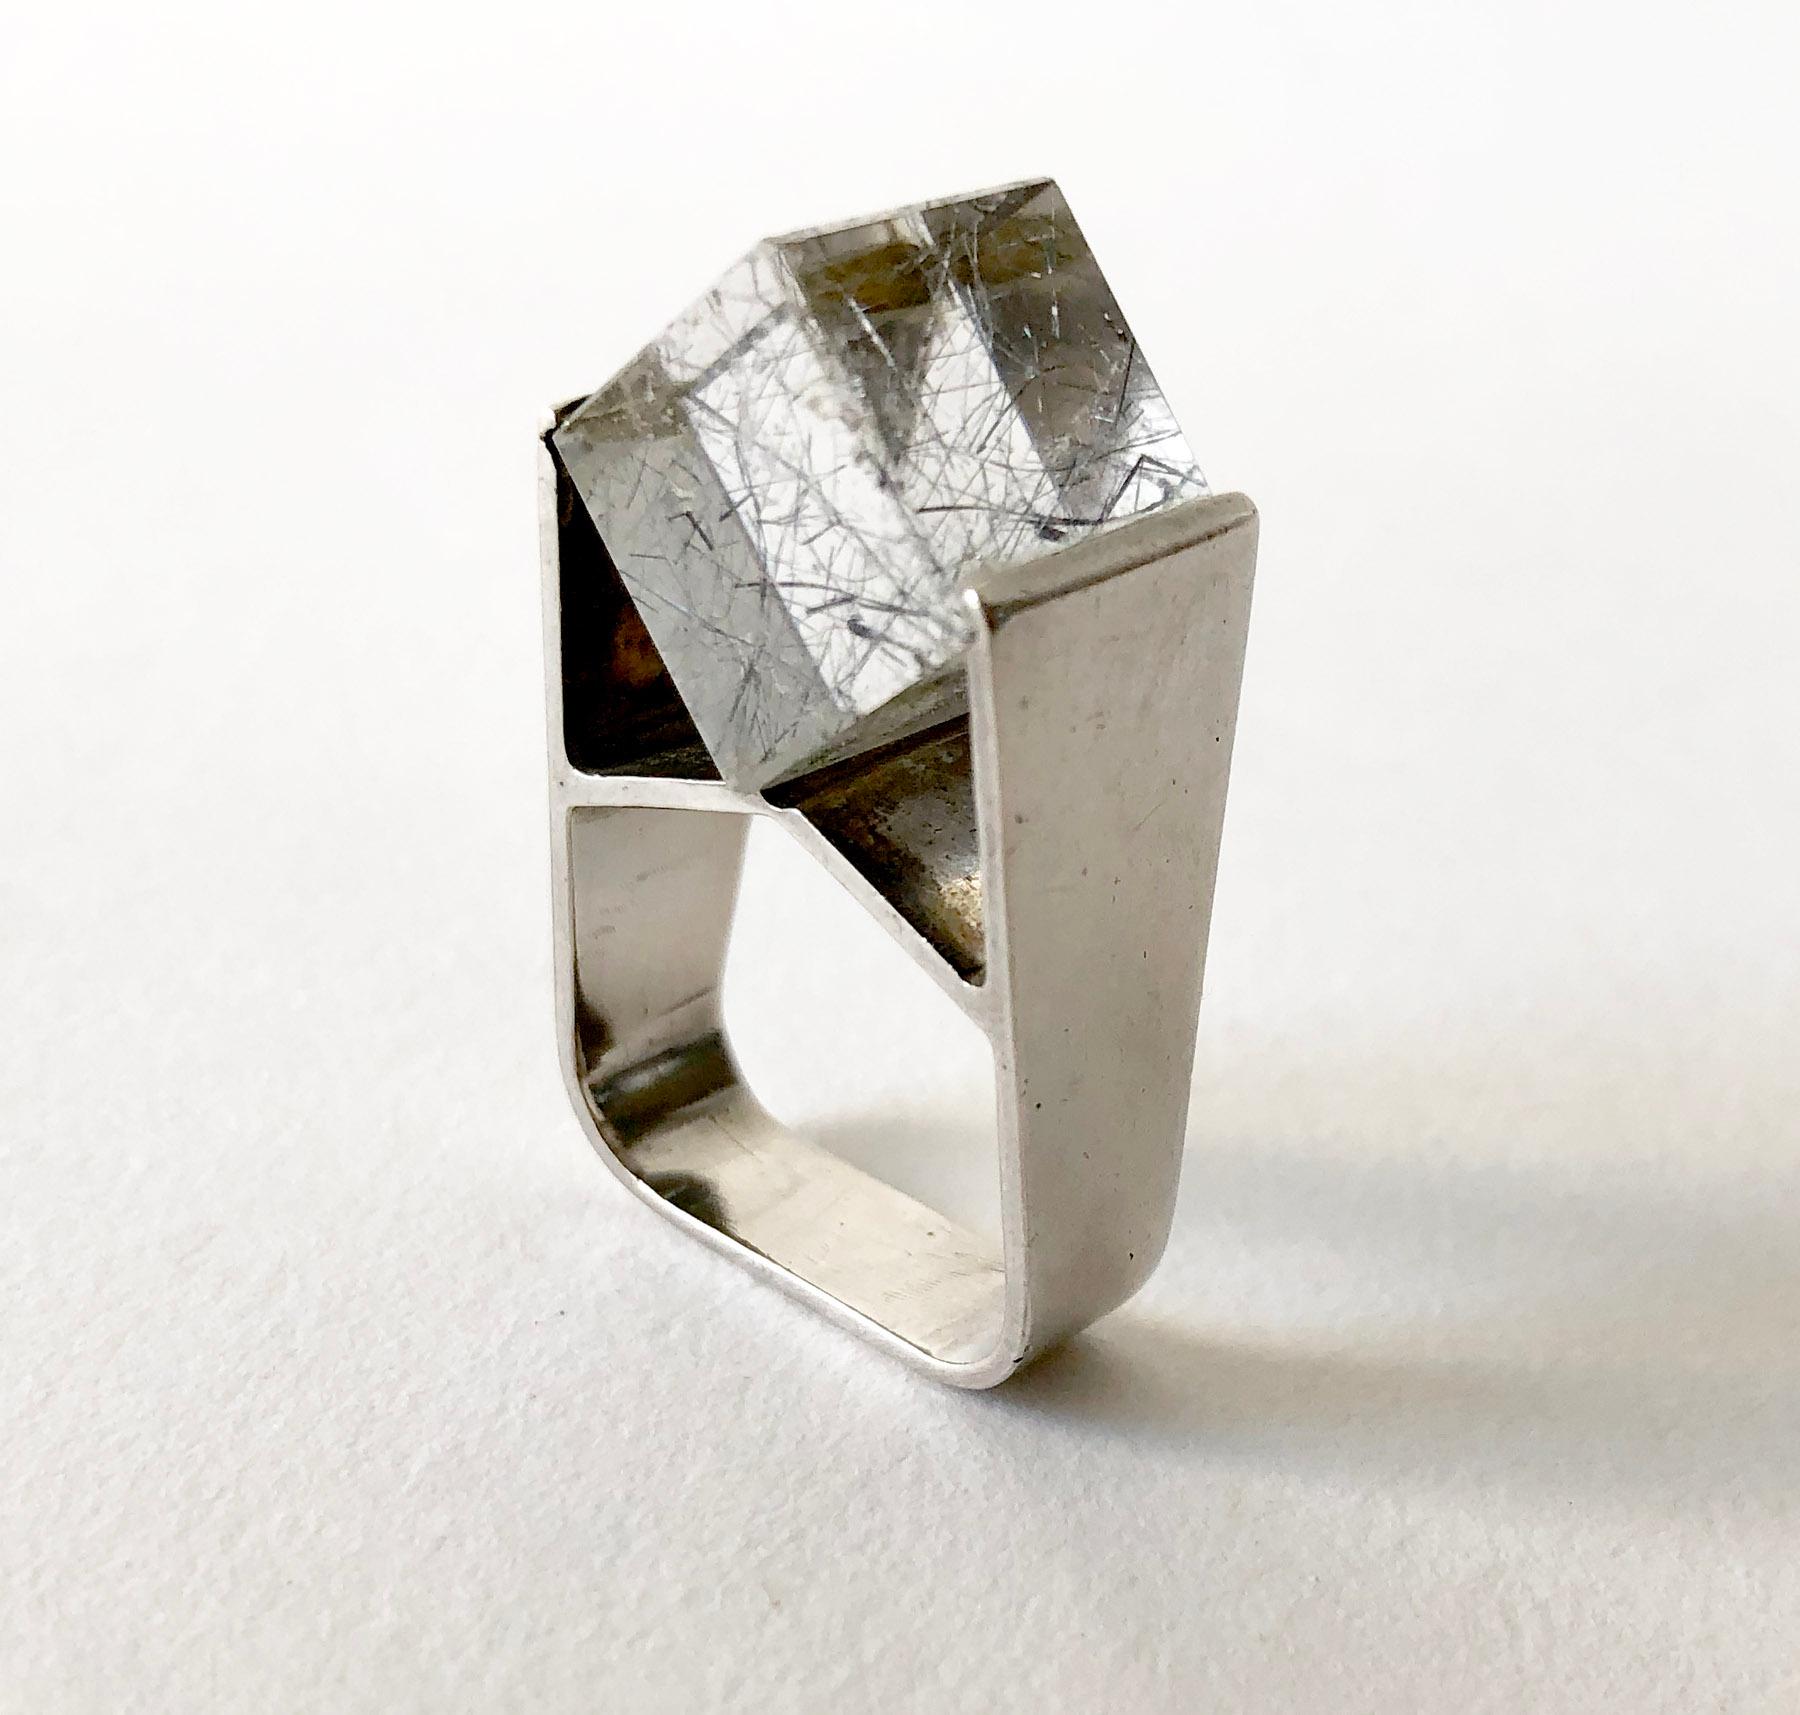 Tension set, rutilated quartz cube set created by Jens Christian Thejls of Denmark.  Ring is a finger size 5.75 to 6.25 and is signed Thejls, 925S, Denmark.  In very good vintage condition. 